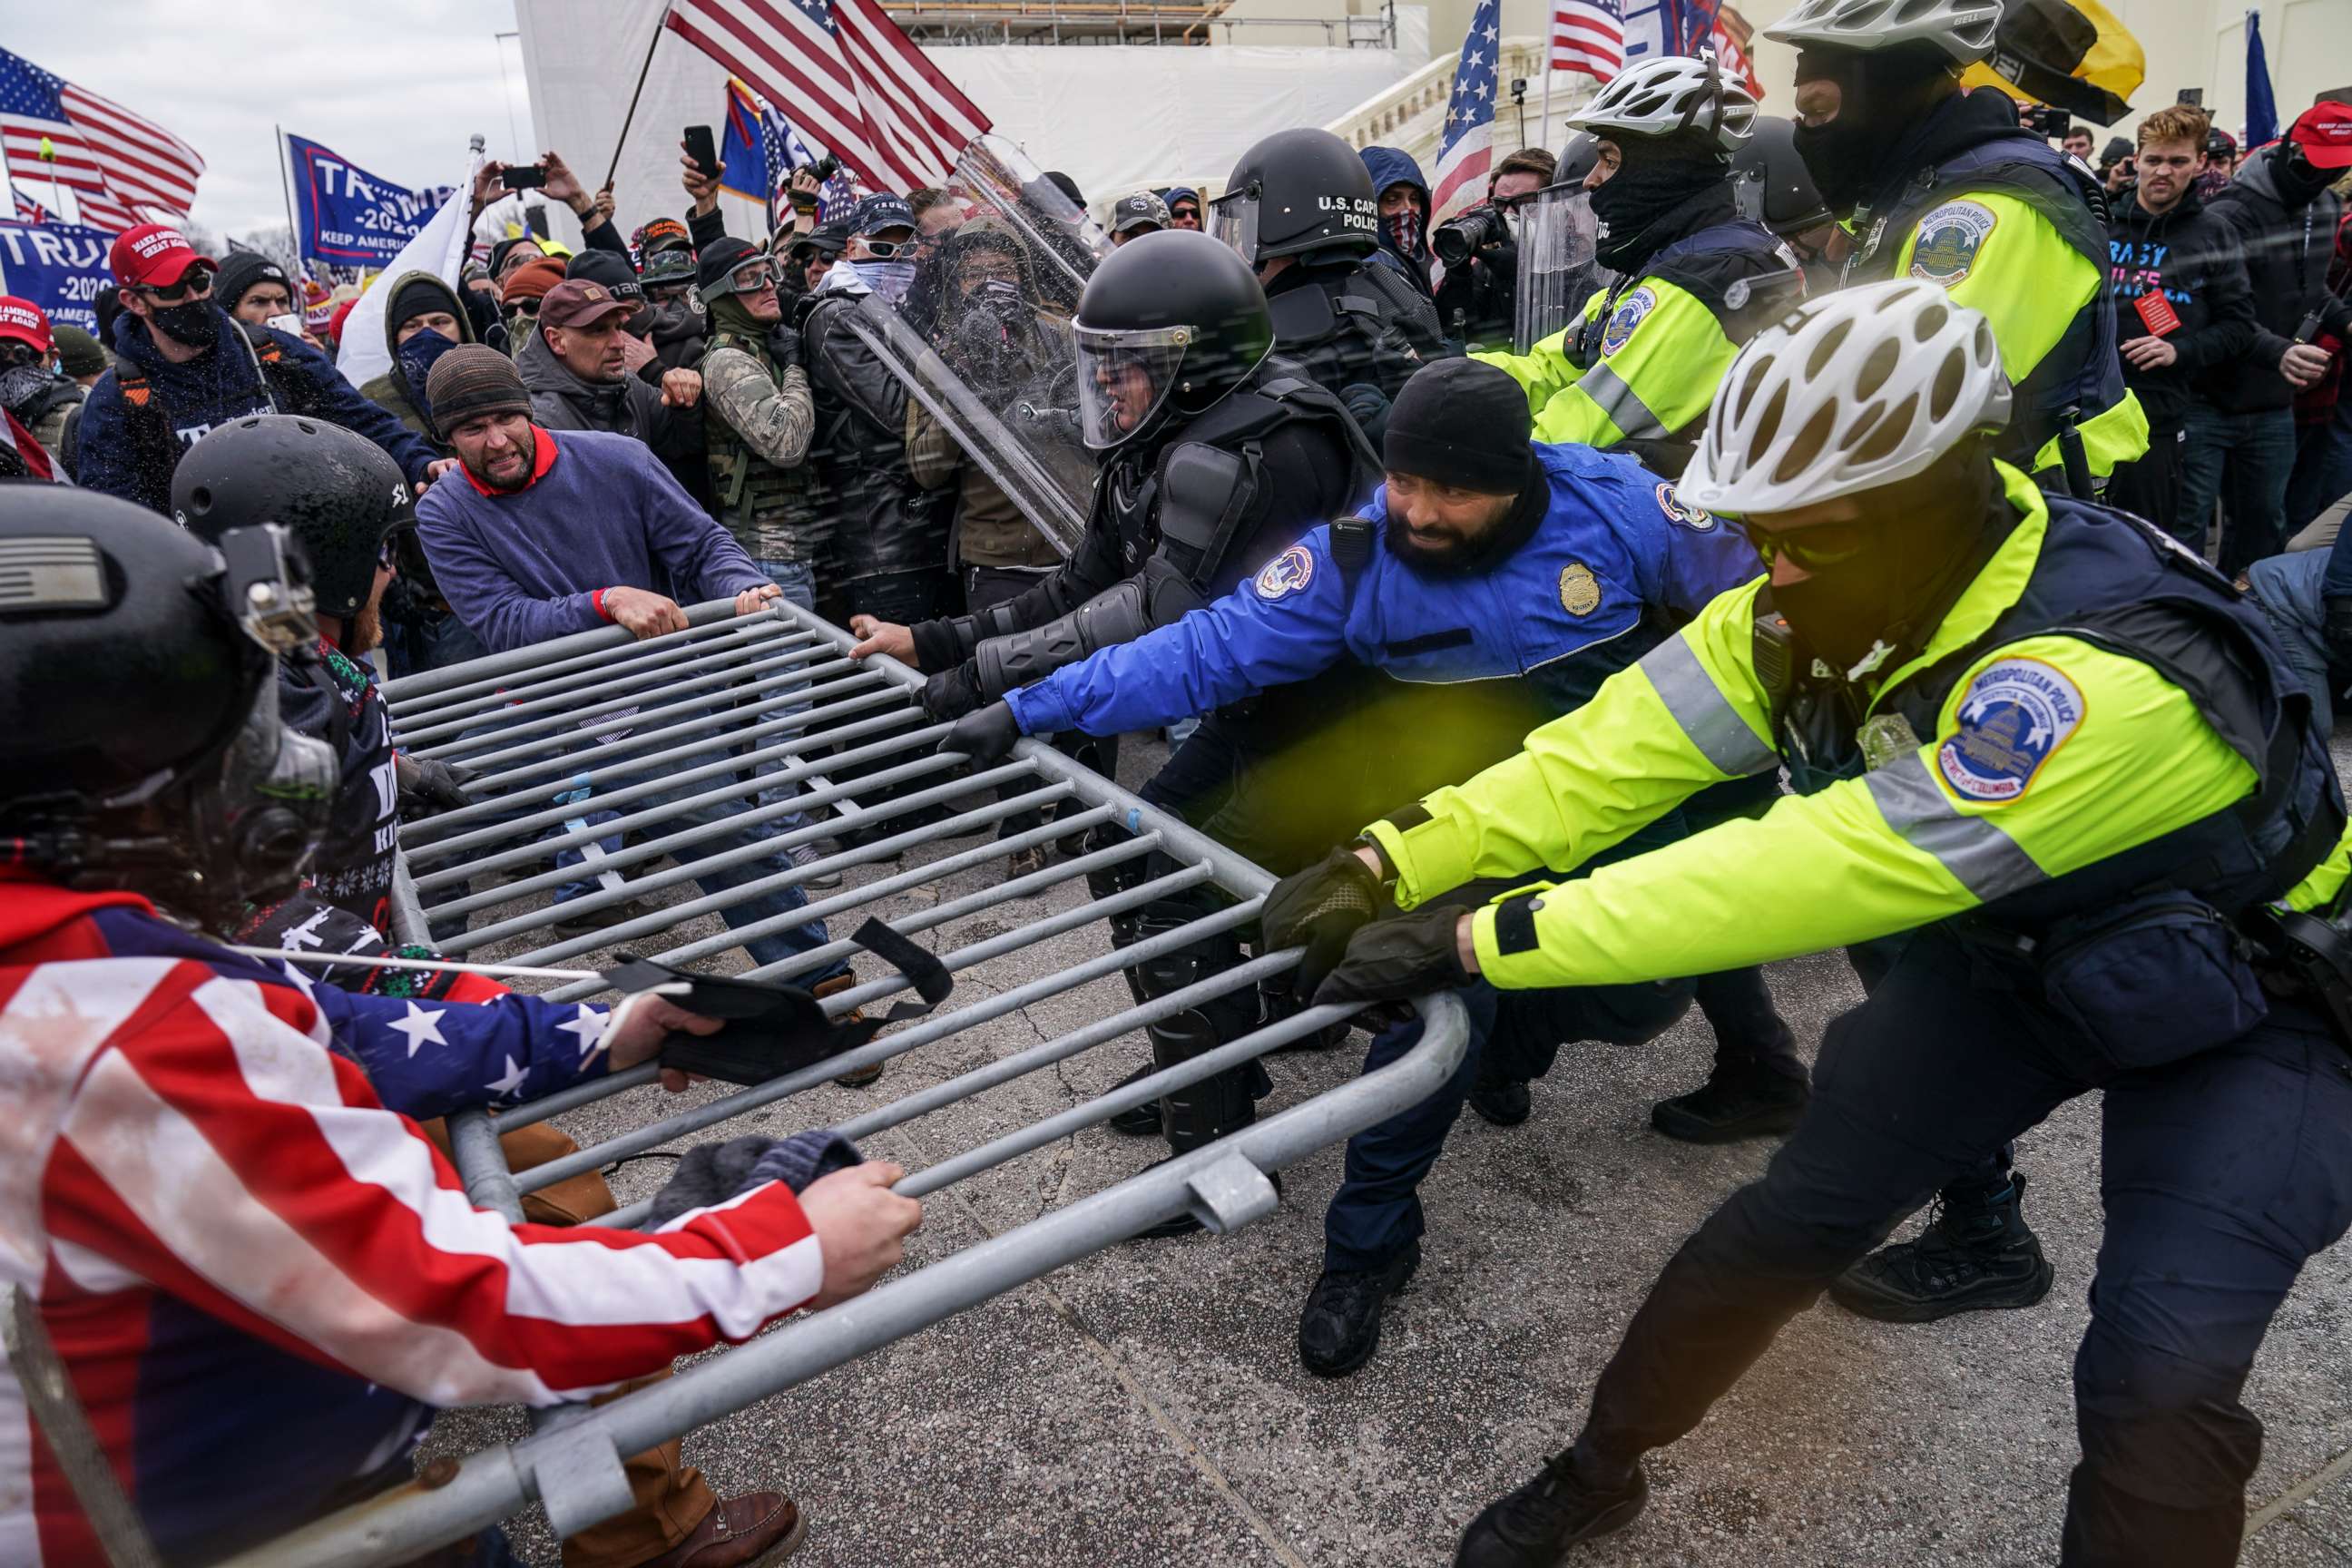 PHOTO: Rioters try to break through a police barrier at the U.S. Capitol in Washington, D.C., on Jan. 6, 2021.